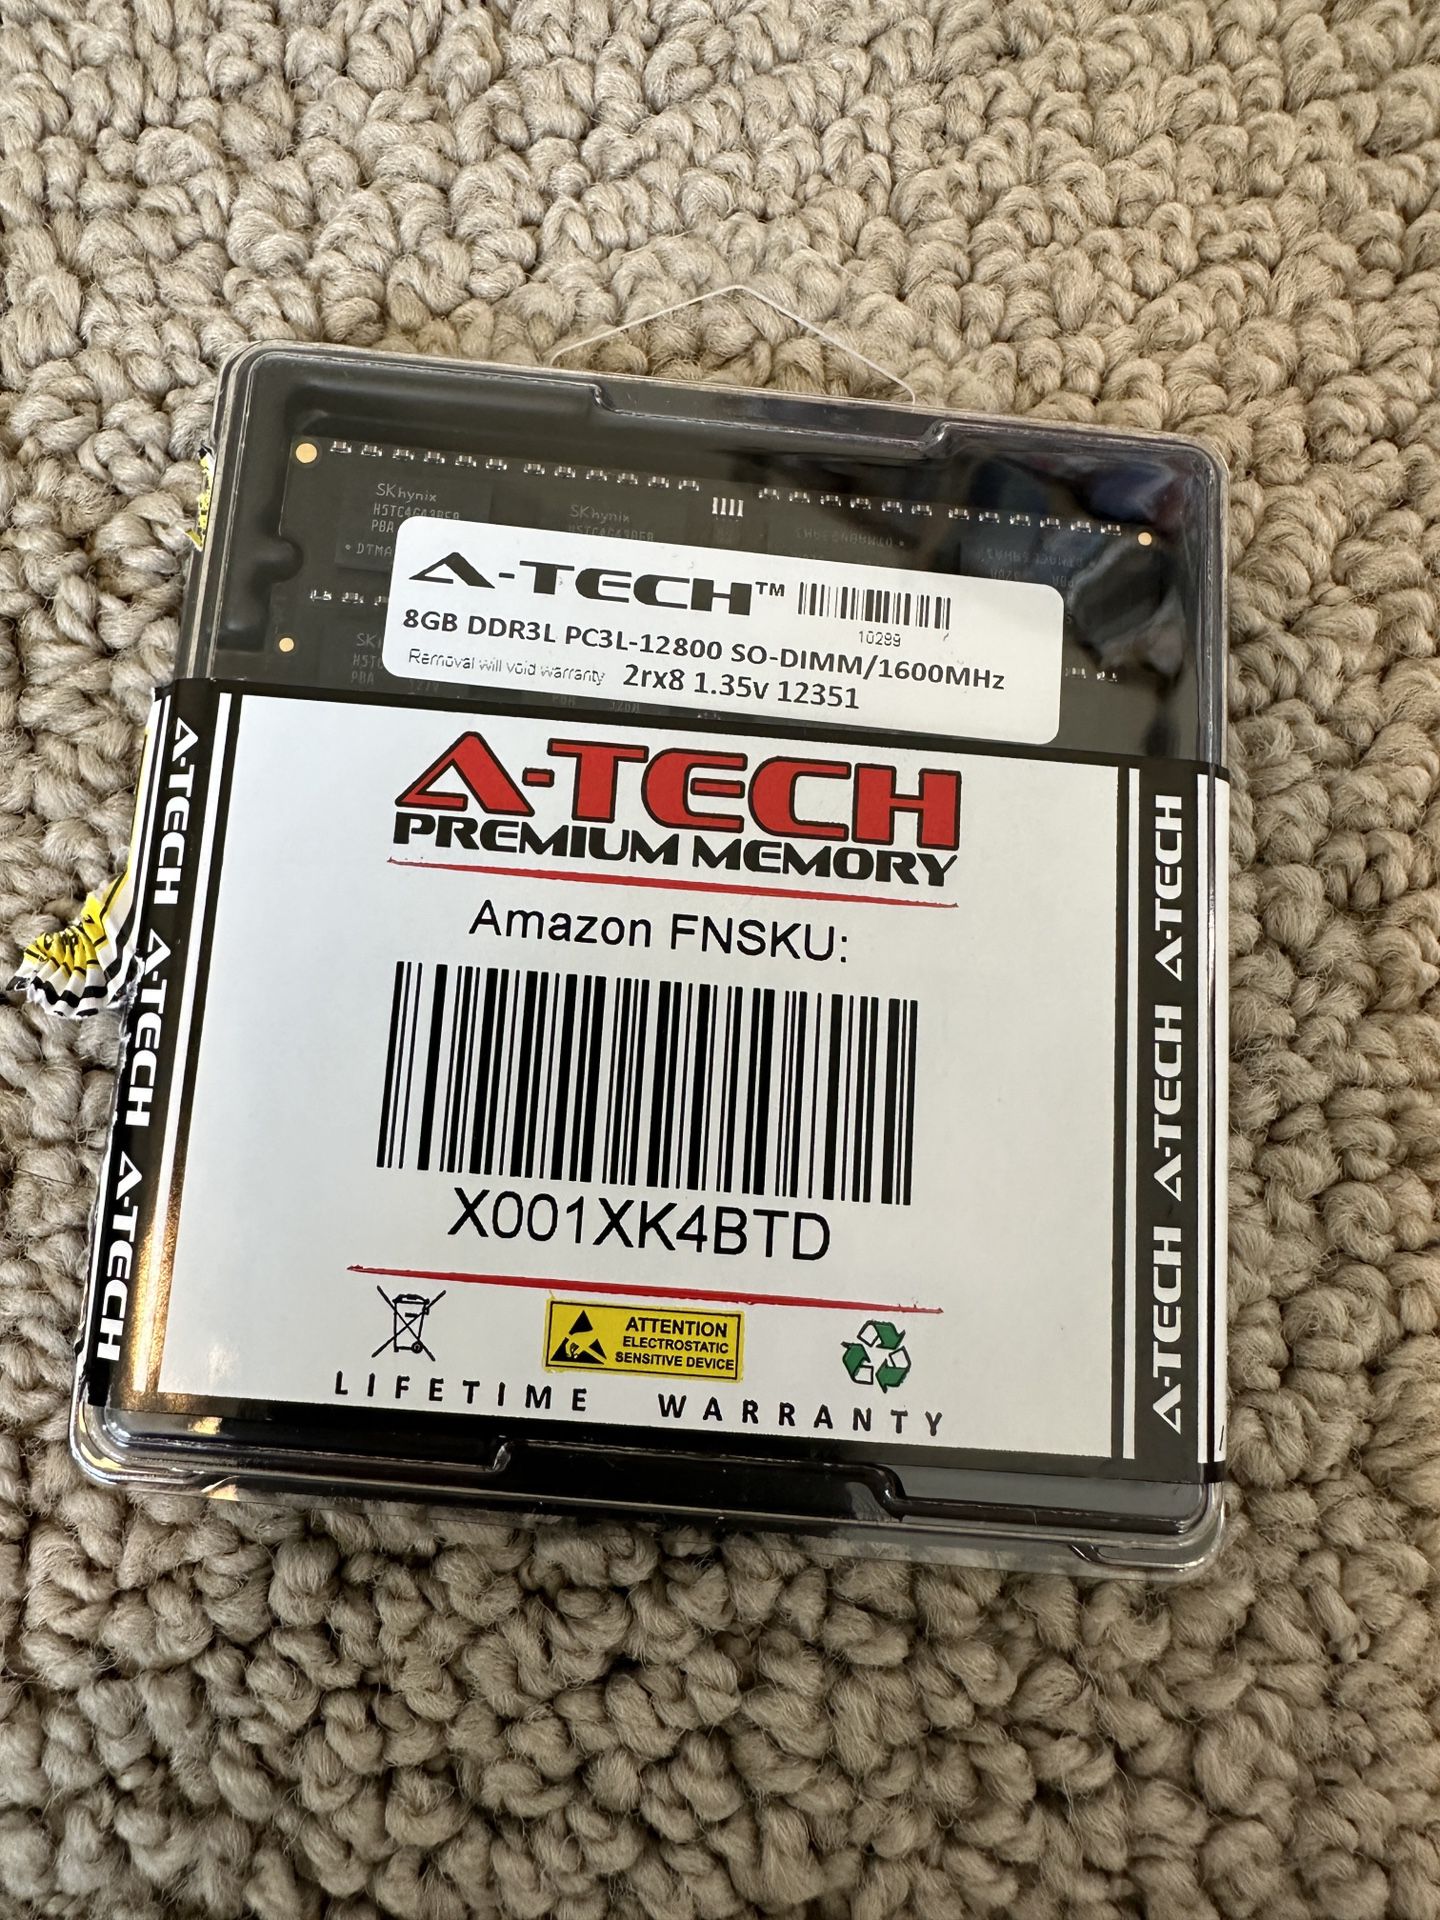 16gb DDR3L-1600 A-Tech 2x8gb SODIMM for $25 Or Best Offer